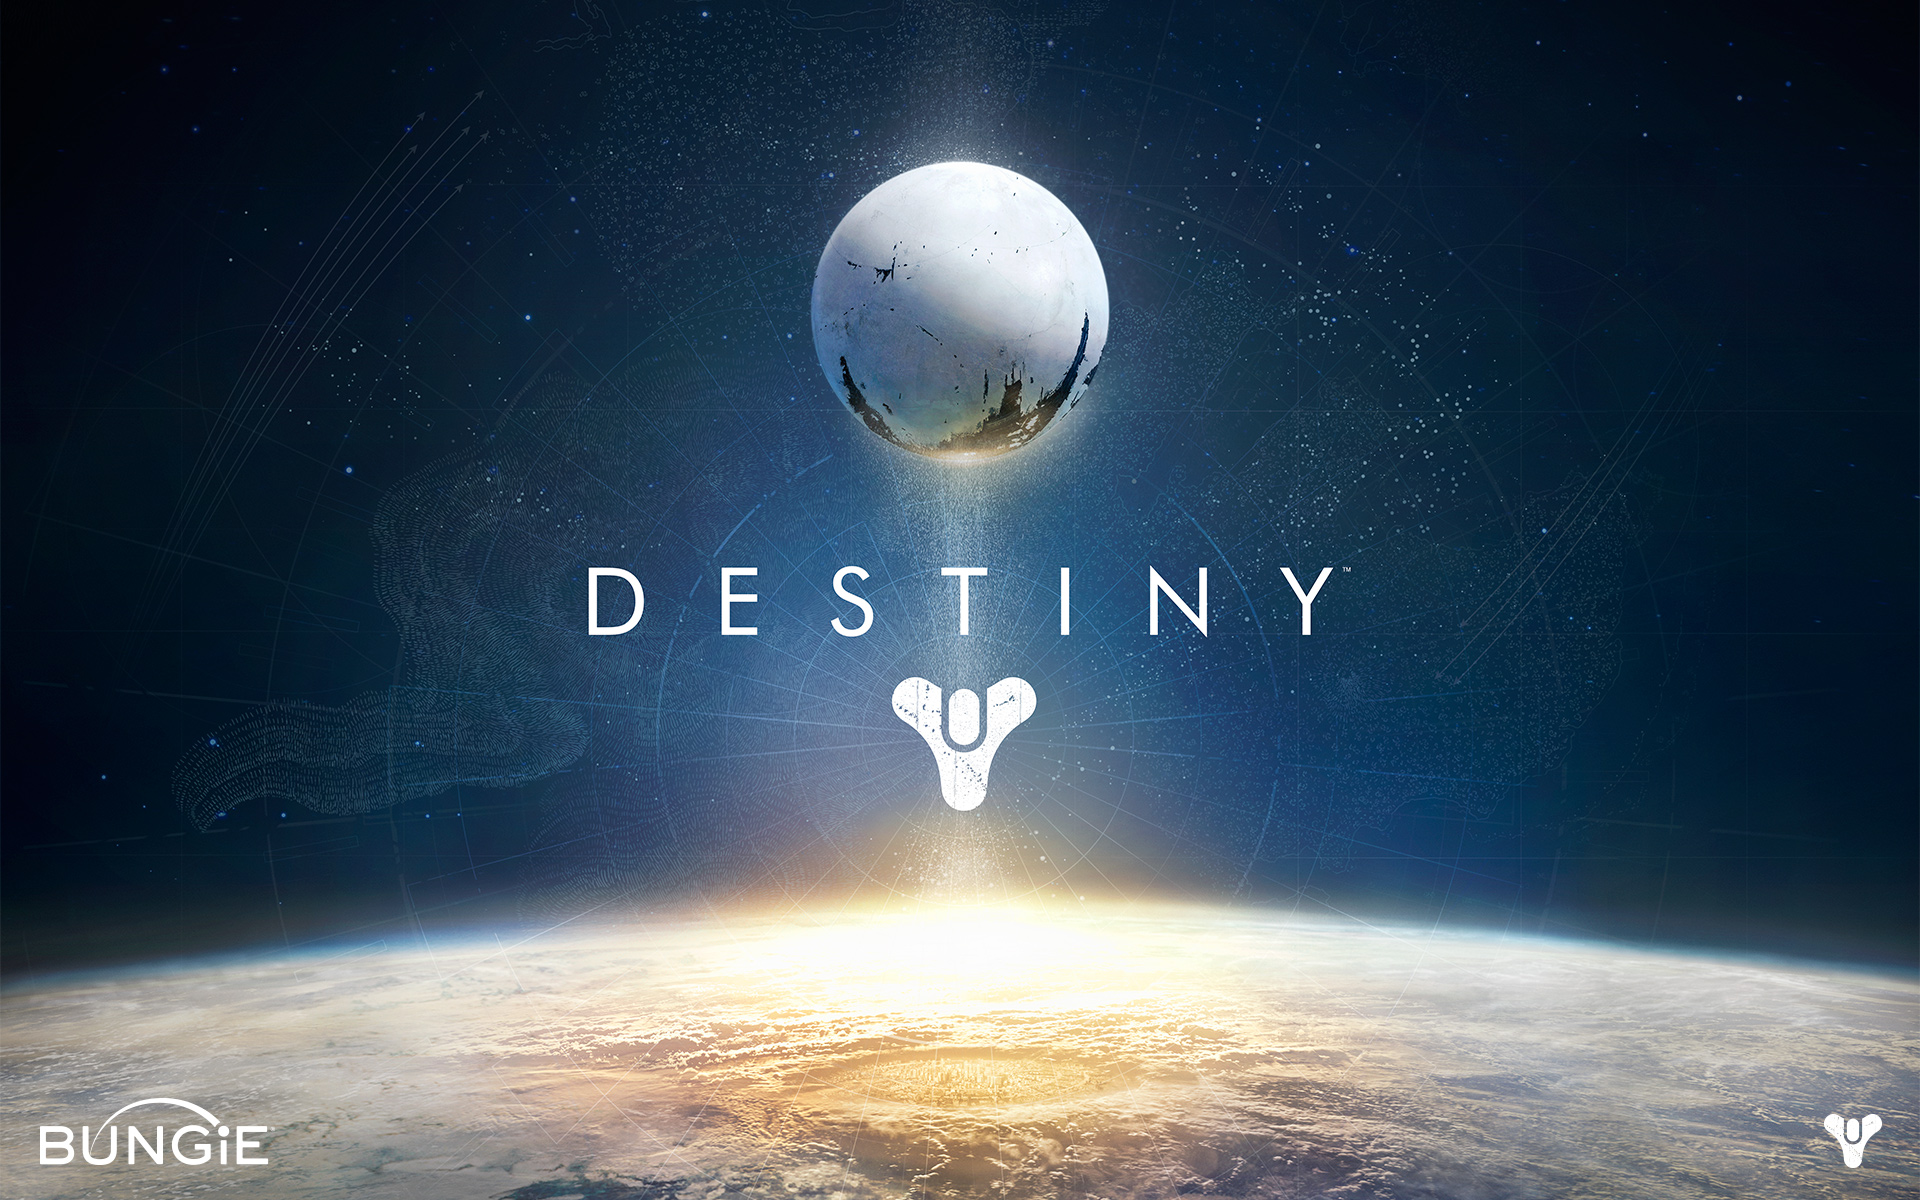 Geek insider, geekinsider, geekinsider. Com,, destiny pre-order deals for labor day weekend, news